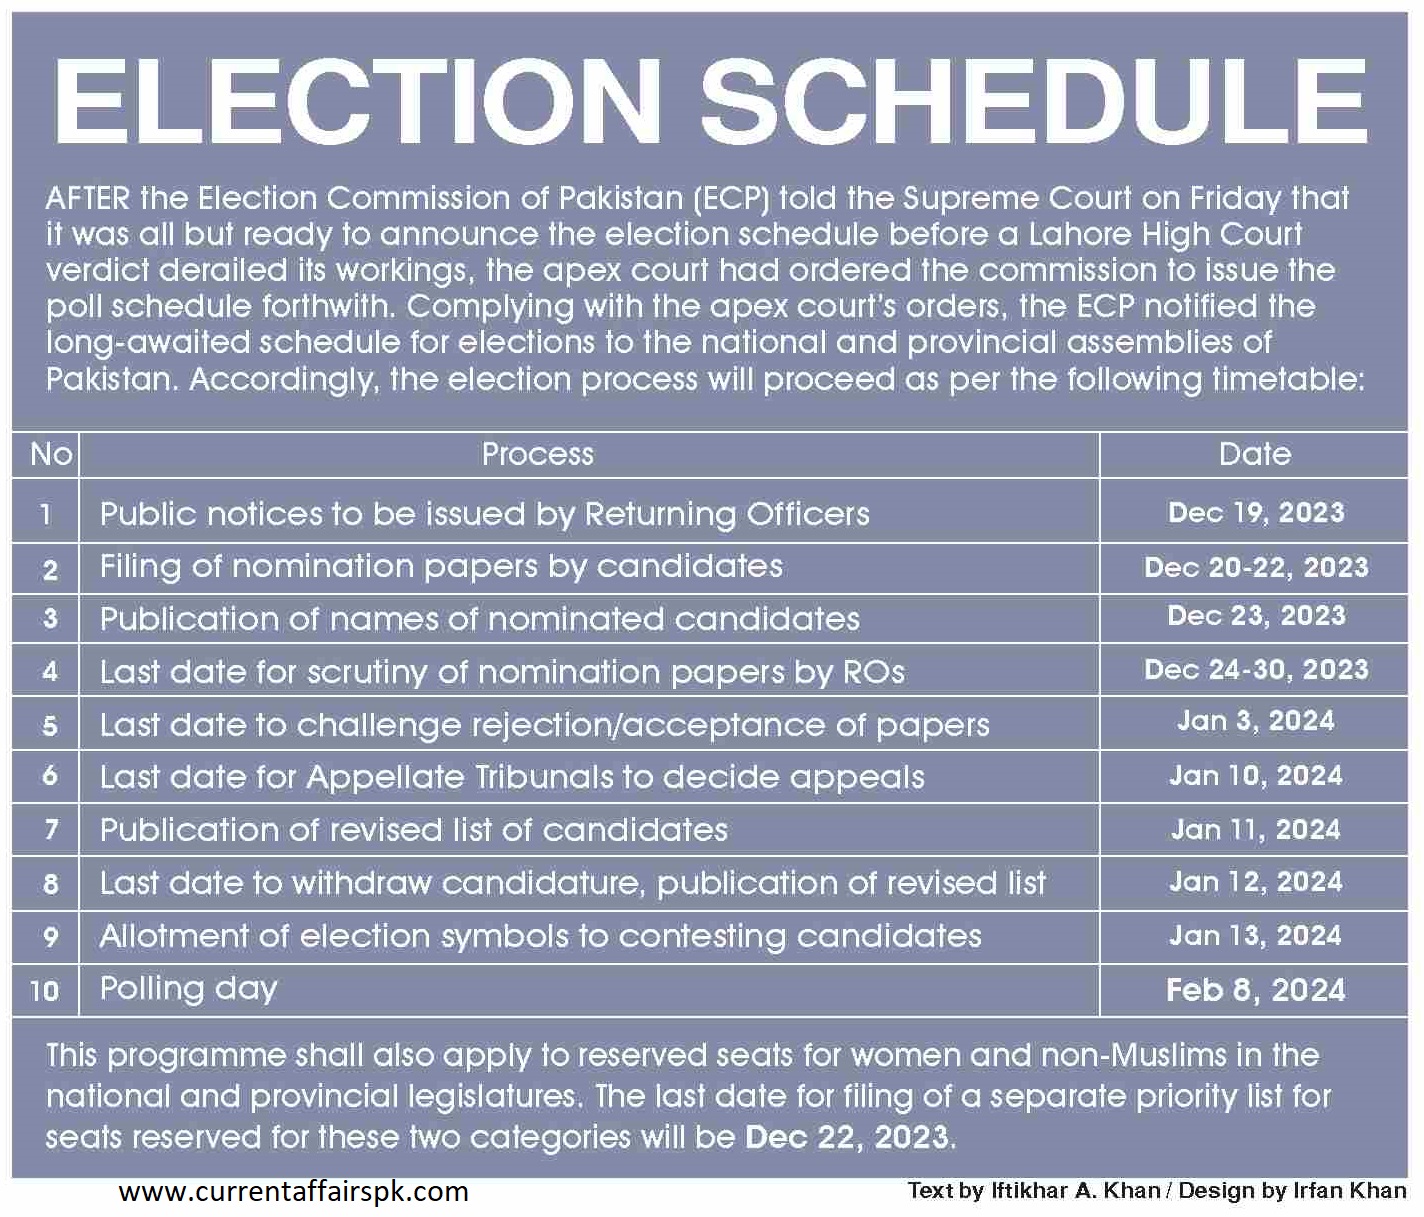 Pakistan's General Election 2024 Election Schedule By Election Commission of Pakistan ECP